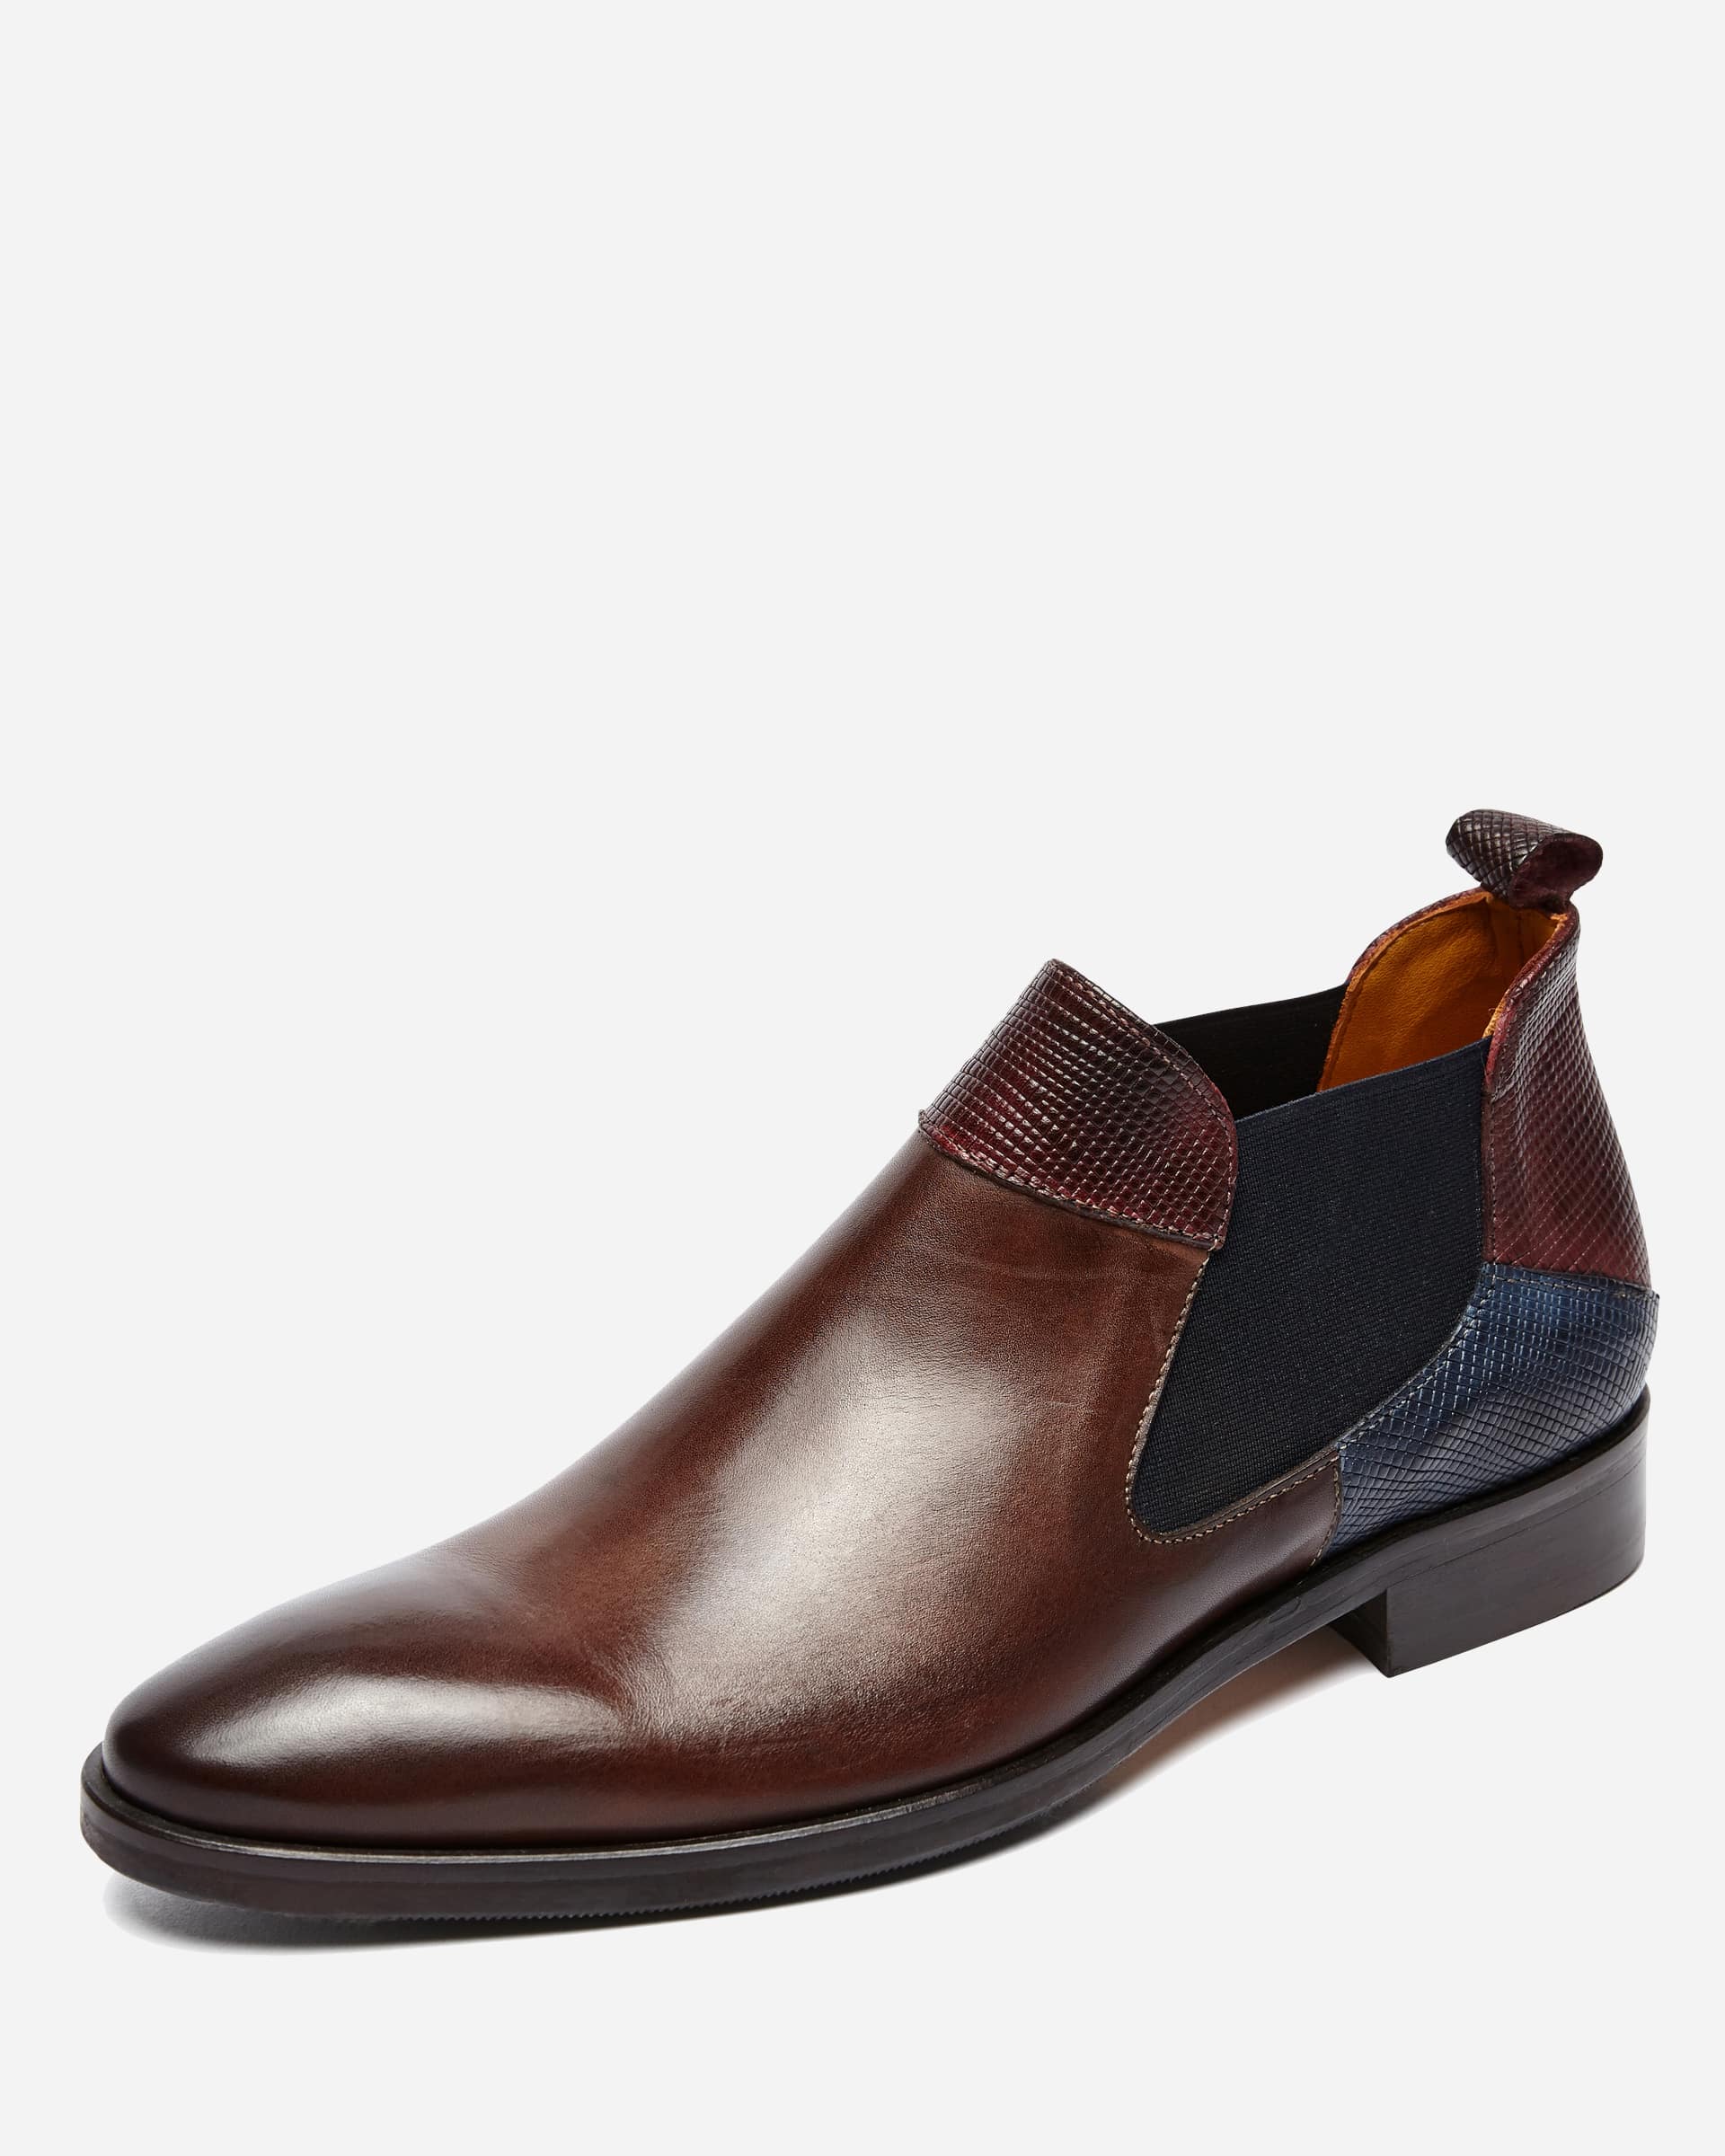 Detailed Chelsea Boot - Shop Chelsea Boots at Menzclub